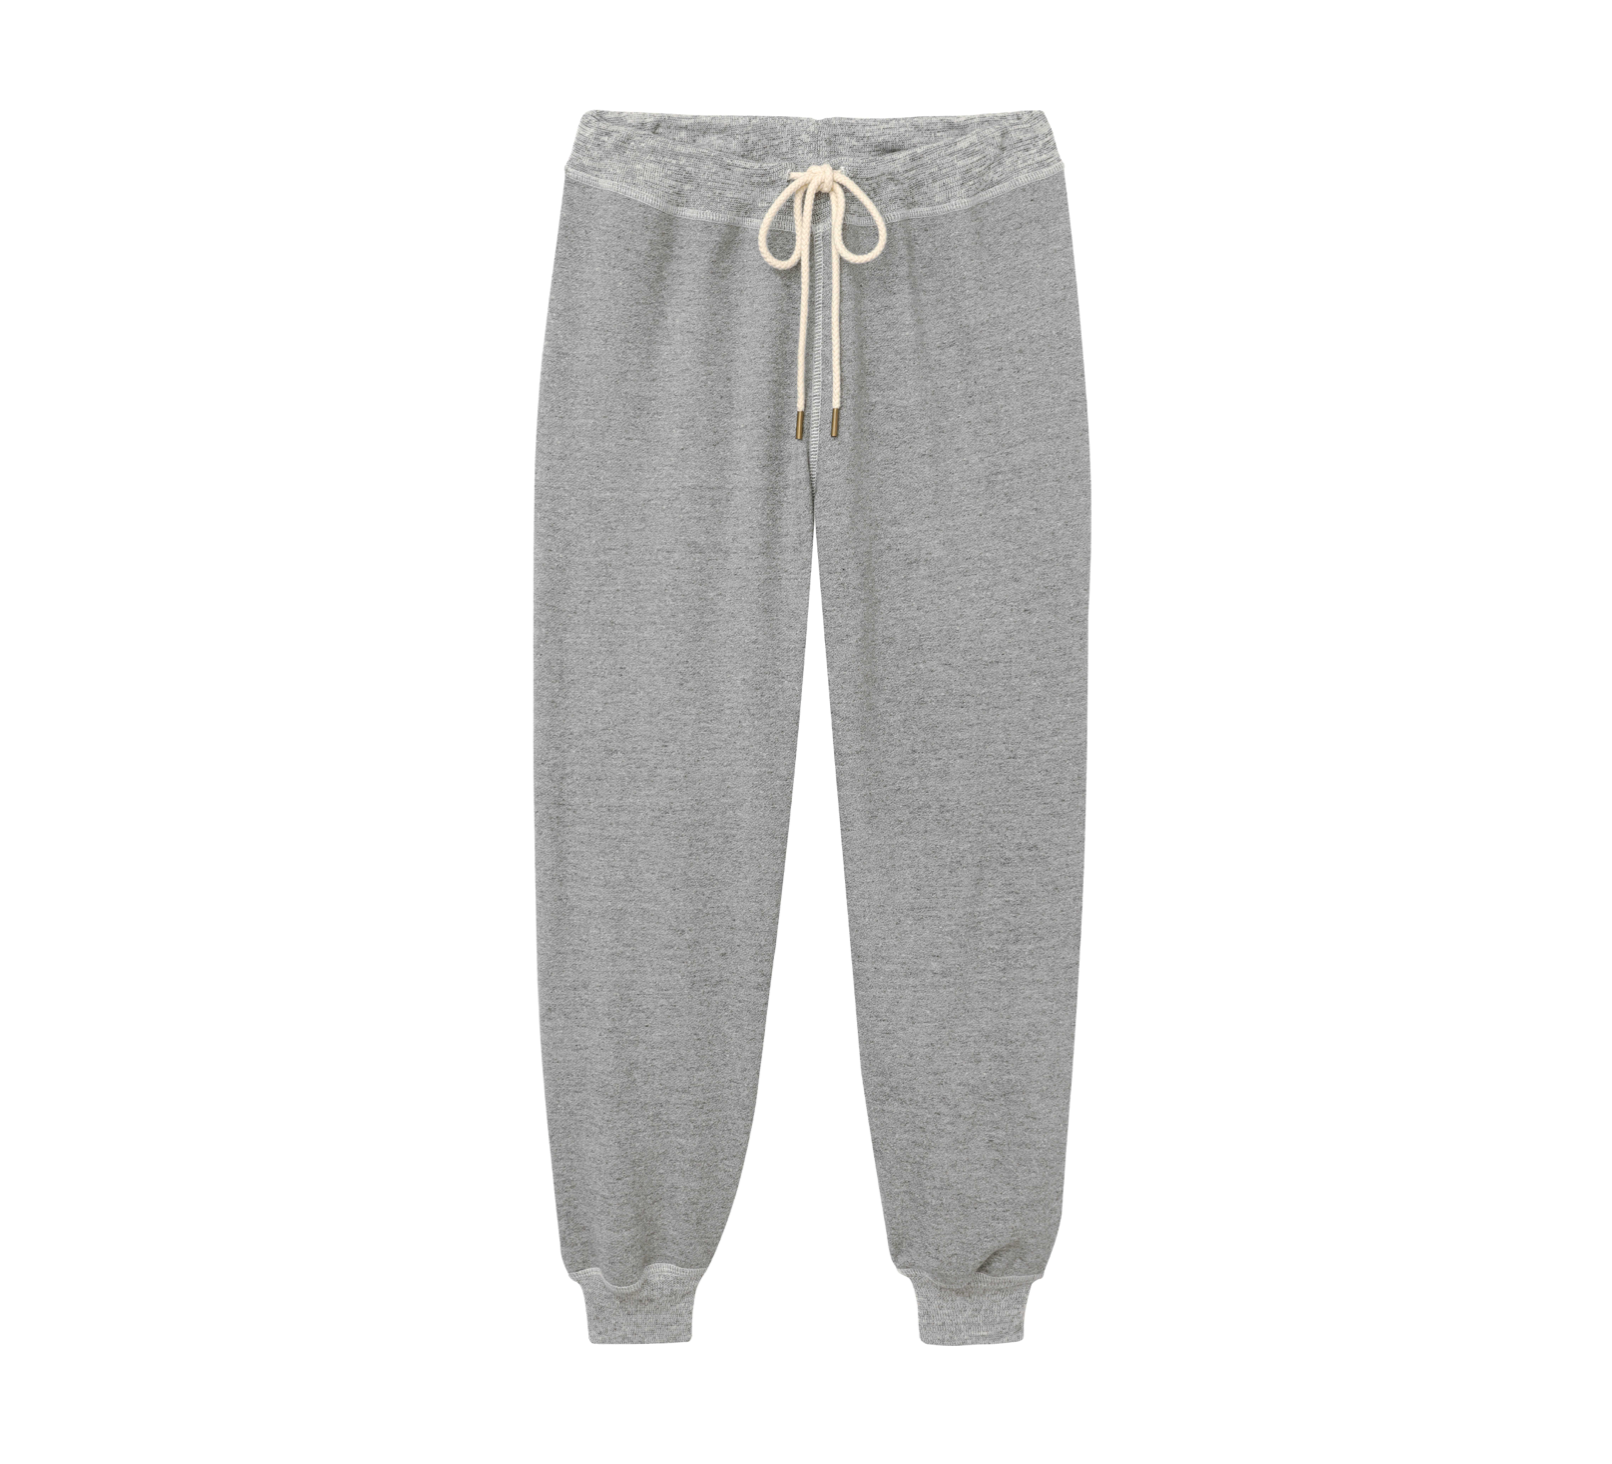 The Cropped Sweatpant in Glacier Blue